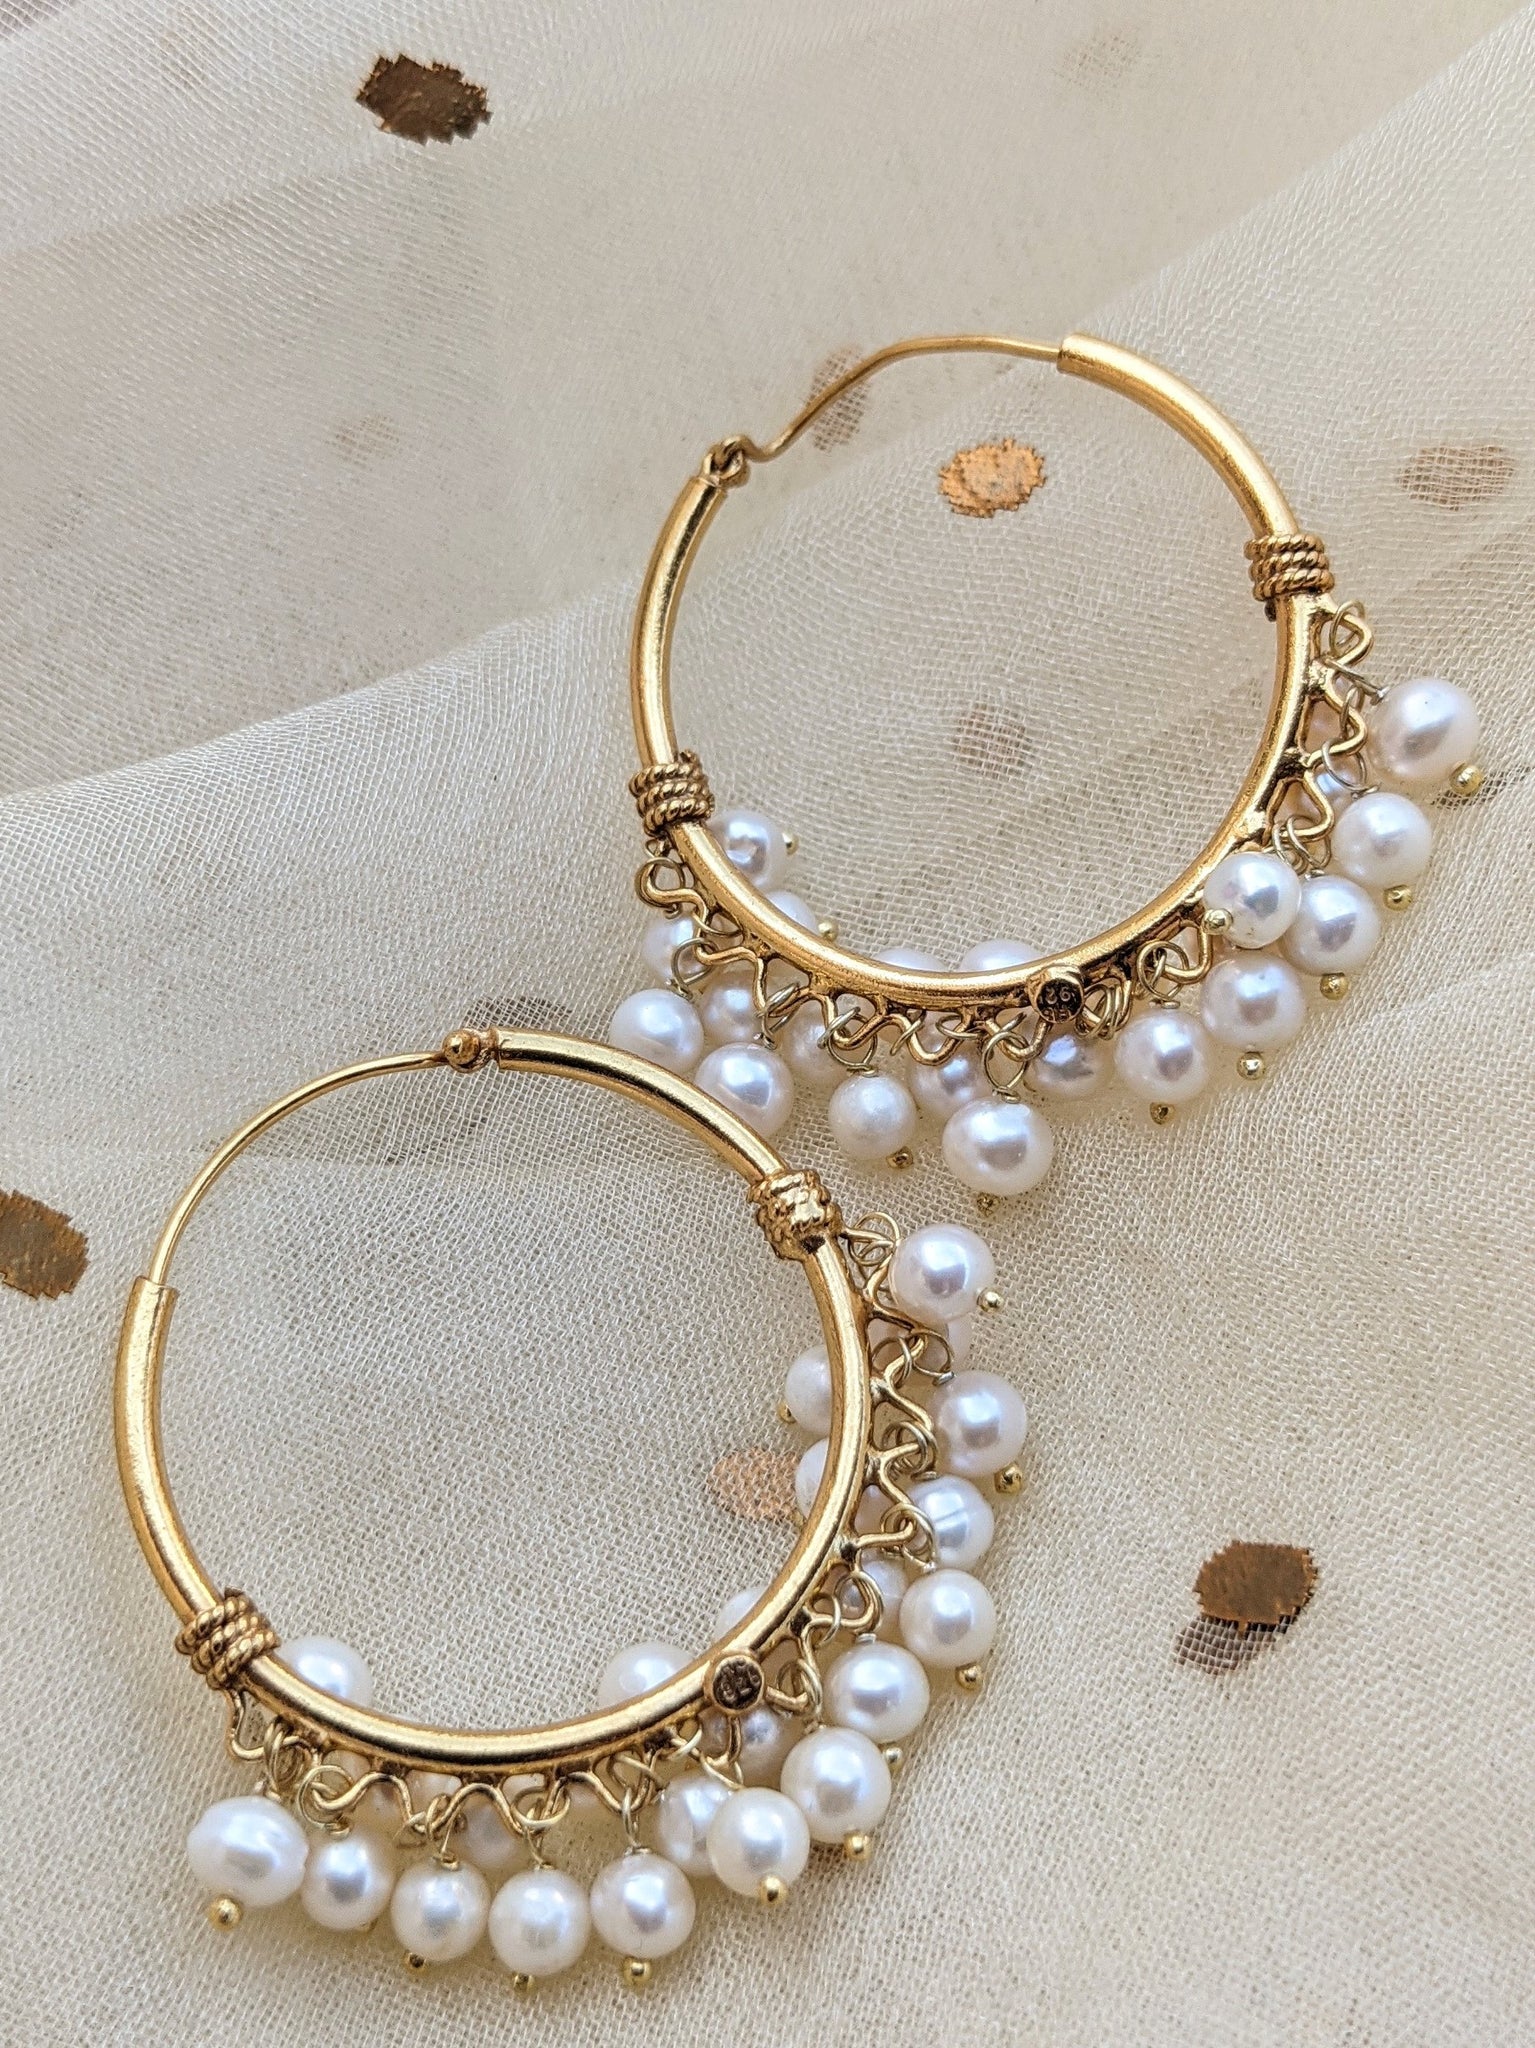 Silver Hoop/Bali with gold polish and freshwater pearls